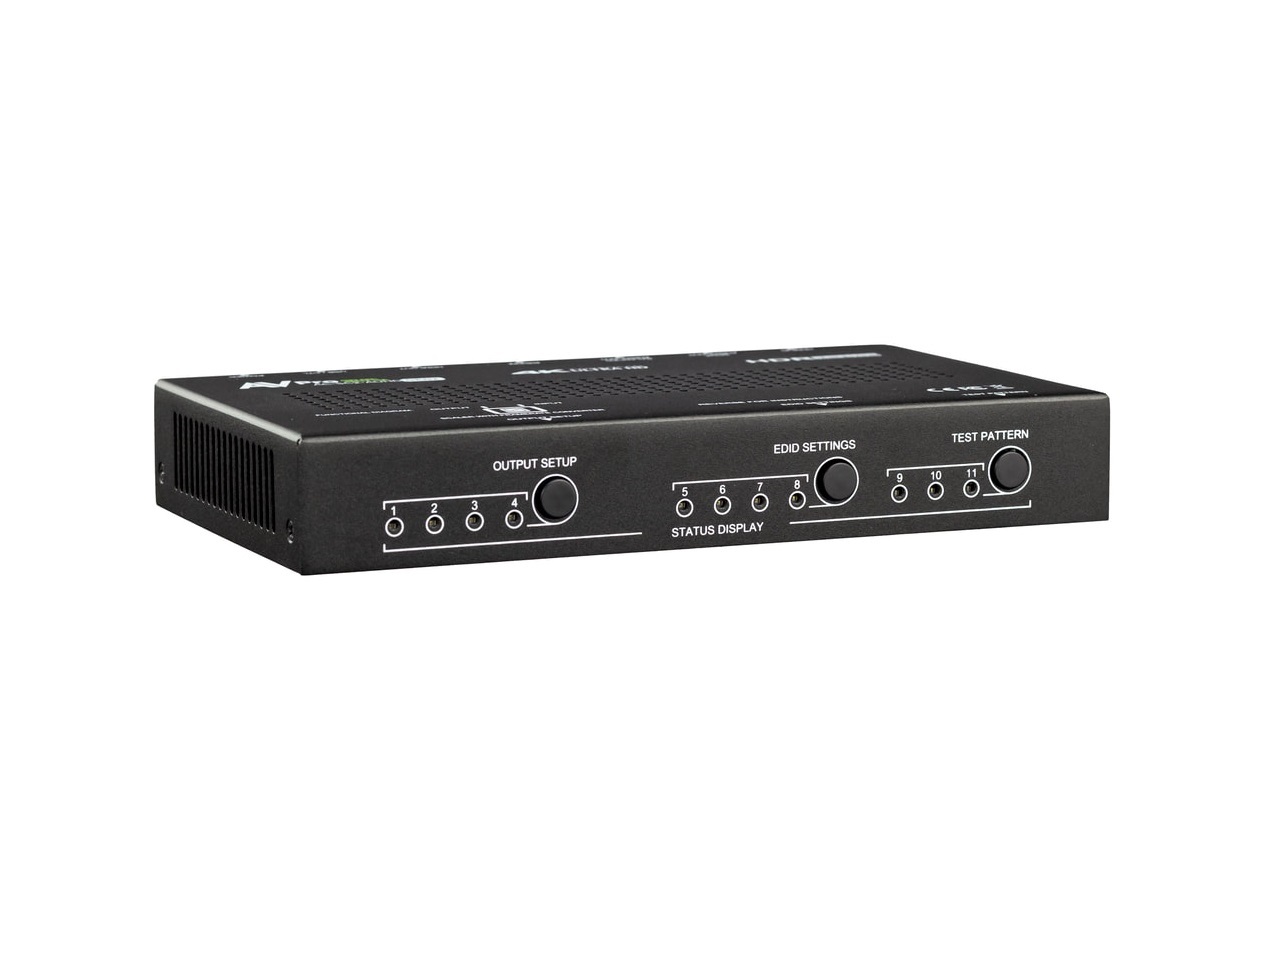 AC-SC2-AUHD-GEN2 4K Up/Down HDMI Scaler with 480 to 4K and Adaptive Scaling by AVPro Edge